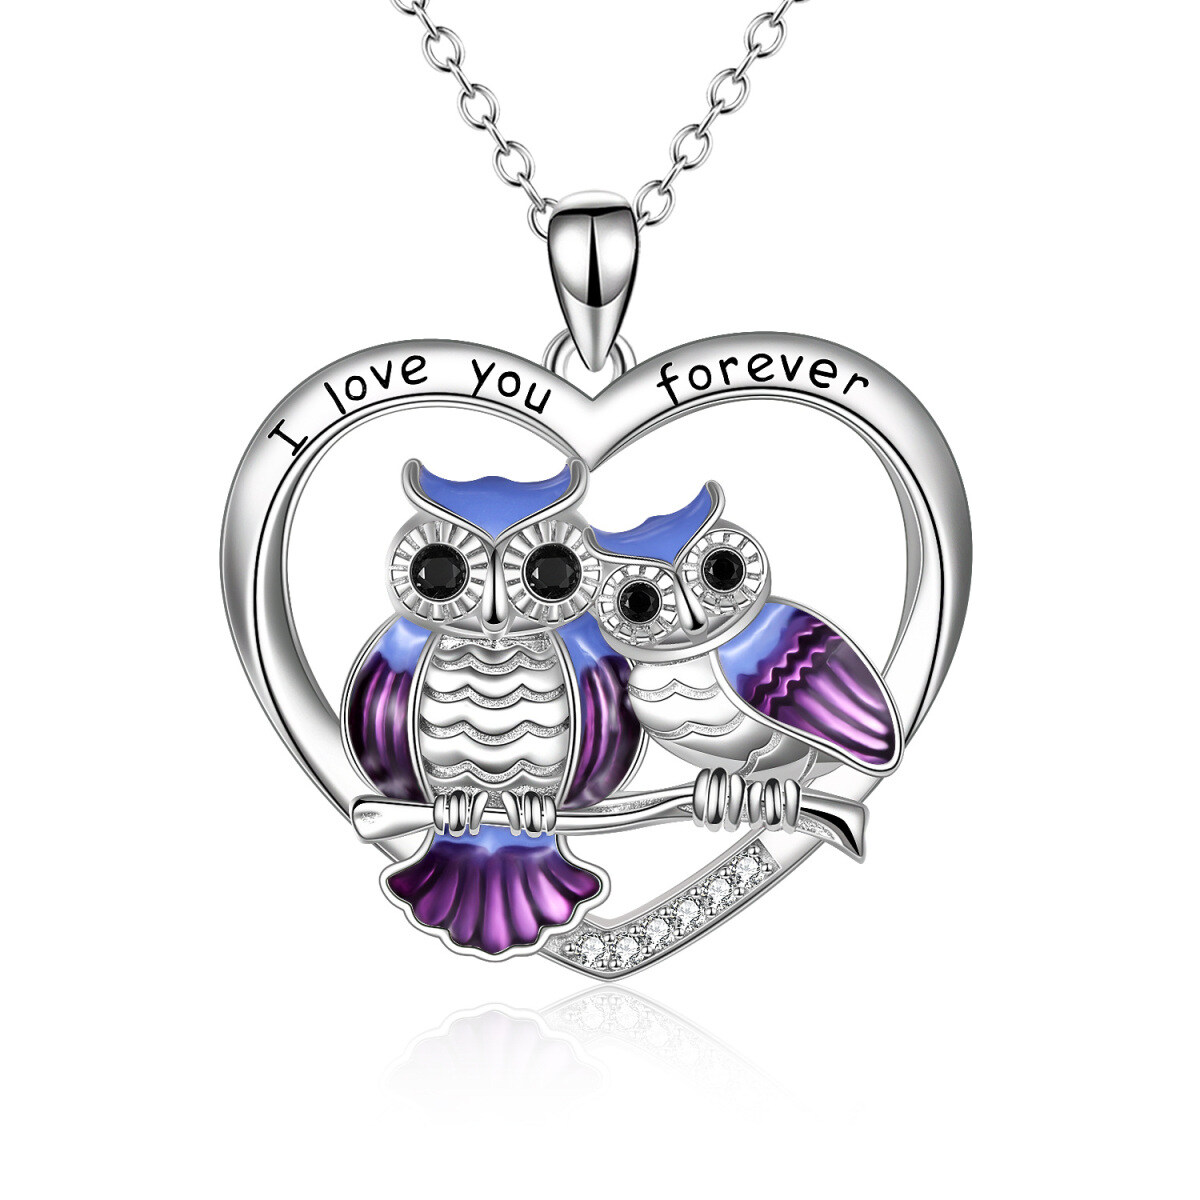 Sterling Silver Owl & Heart Pendant Necklace with Engraved Word-1